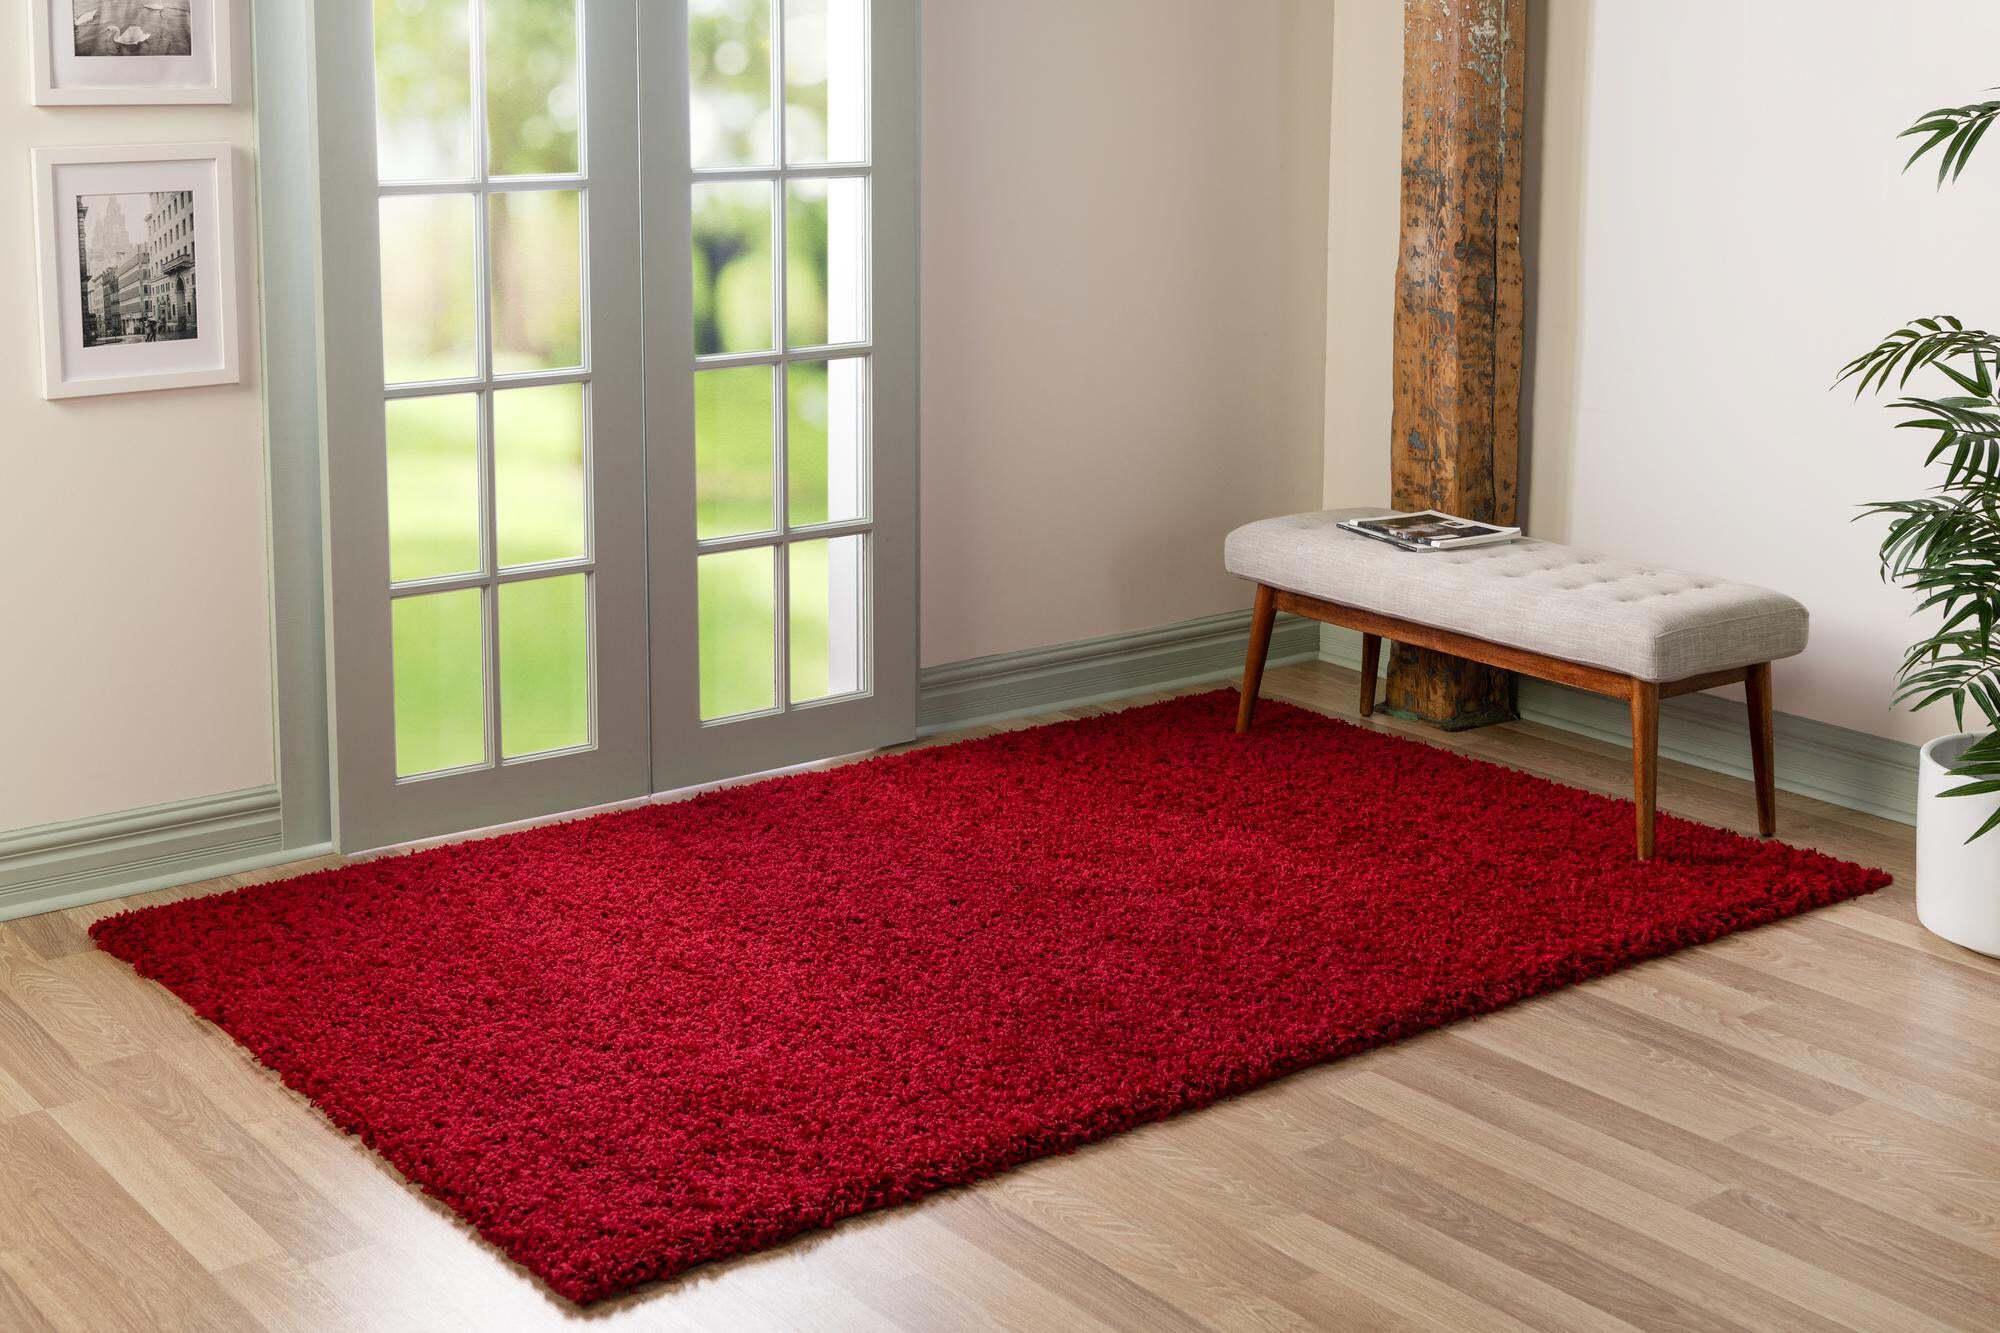 Unique Loom Indoor Rugs - Solid Shag Solid Rectangular 9x12 Rug Cherry Red